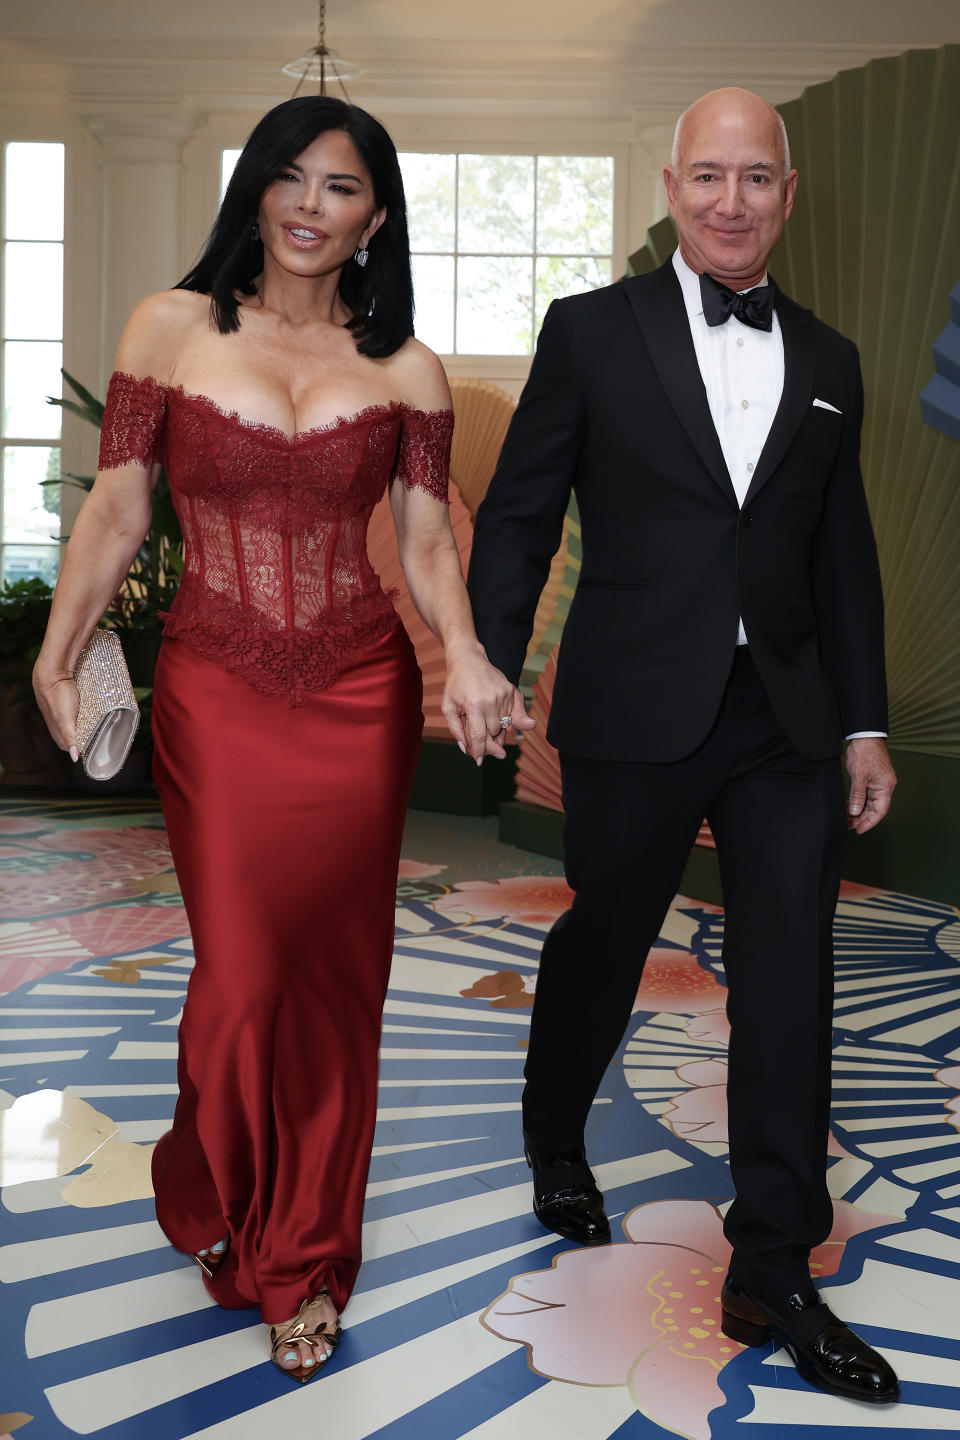 WASHINGTON, DC - APRIL 10: Amazon founder Jeff Bezos (R) and his fiancee Lauren Sanchez arrive at the White House for a state dinner on April 10, 2024 in Washington, DC. U.S. President Joe Biden and first lady Jill Biden are hosting a state dinner for Japanese Prime Minister Fumio Kishida as part of his official state visit.  (Photo by Tasos Katopodis/Getty Images)